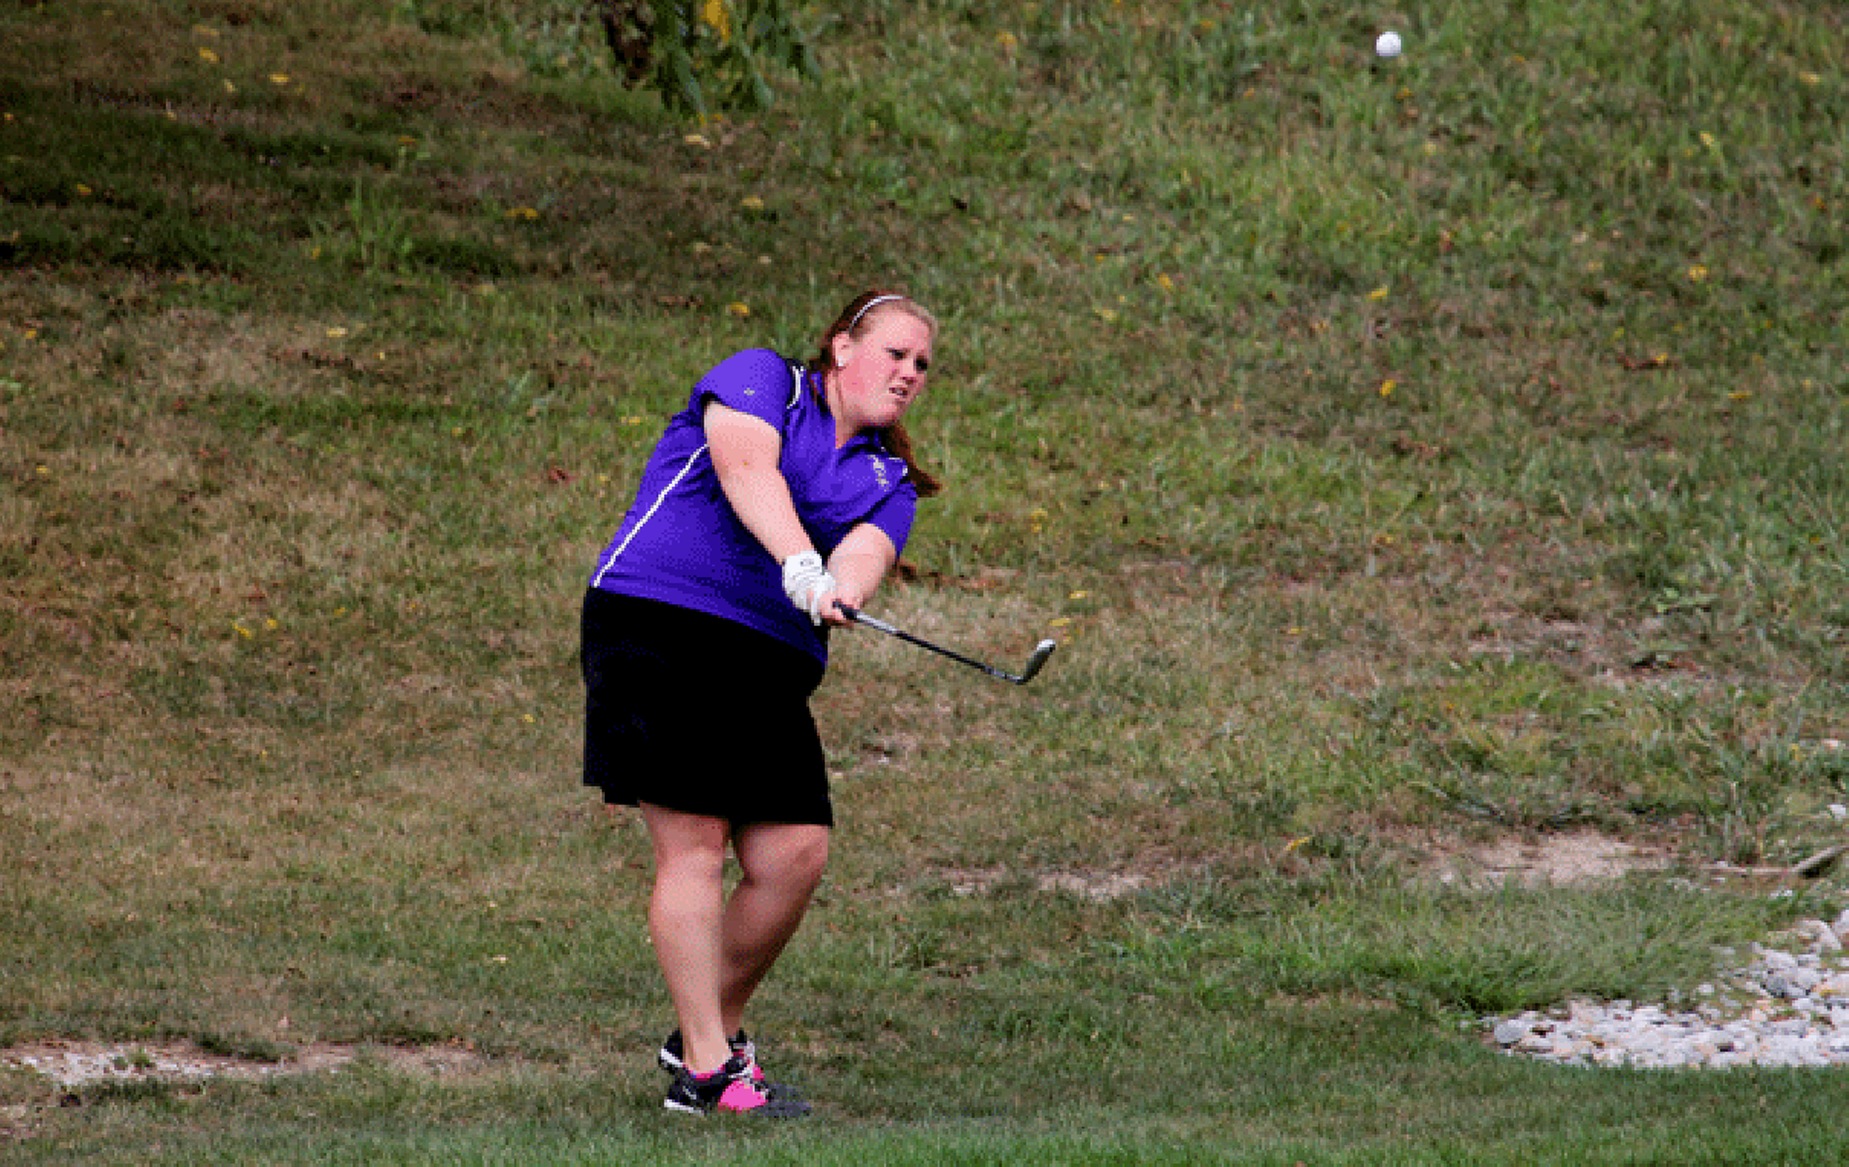 Defiance wraps up first day of HCAC Tournament